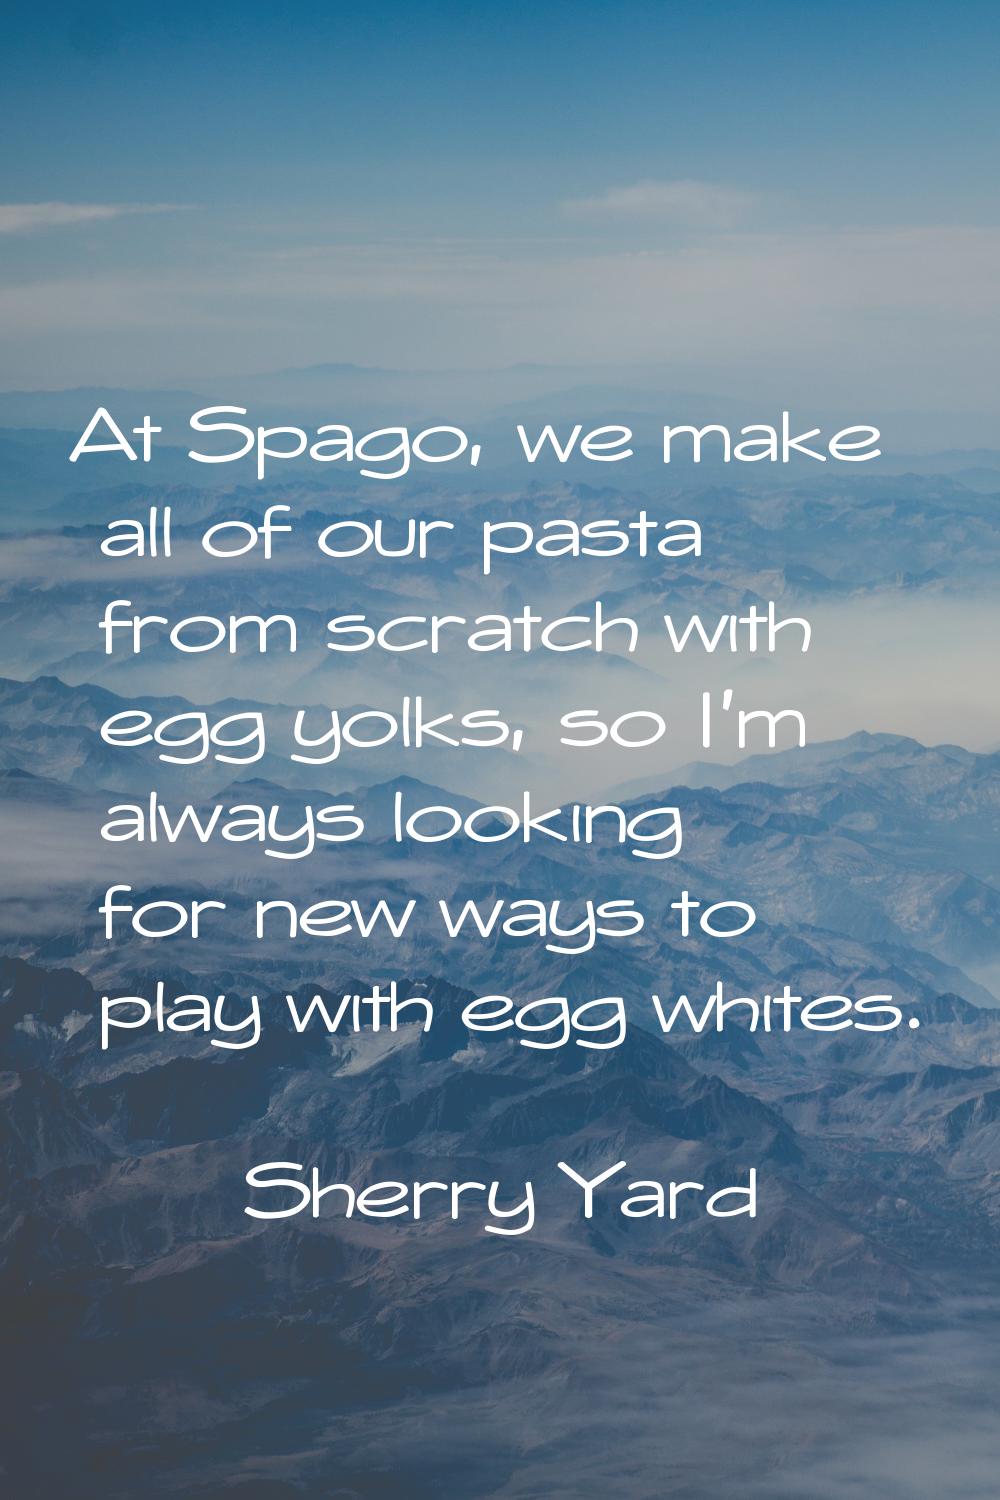 At Spago, we make all of our pasta from scratch with egg yolks, so I'm always looking for new ways 